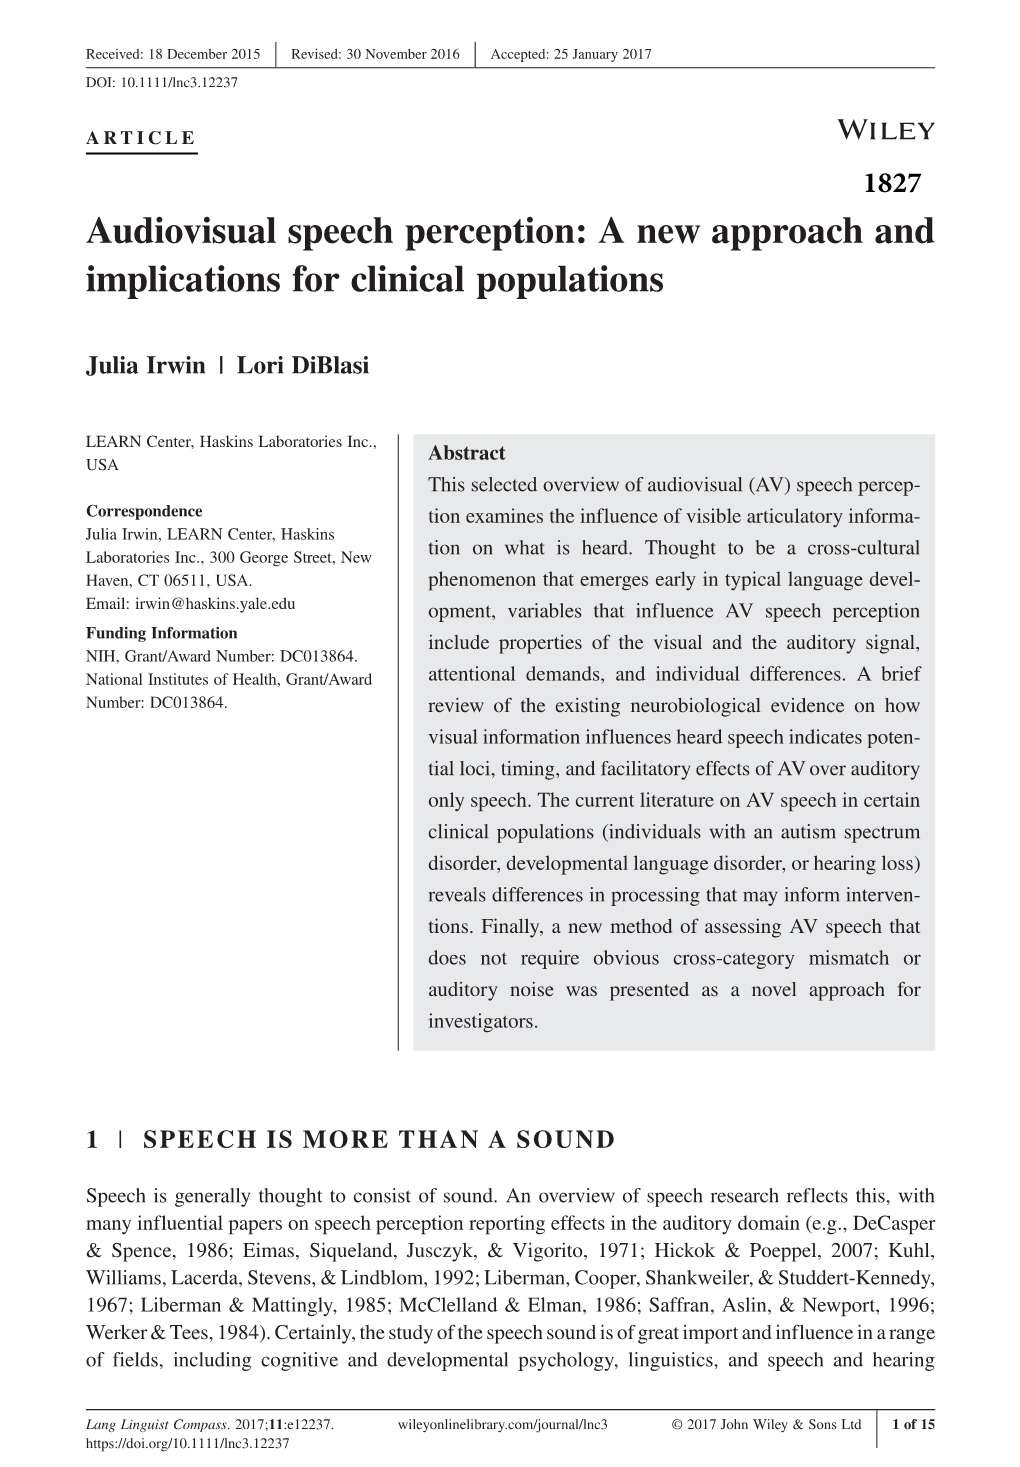 Audiovisual Speech Perception: a New Approach and Implications for Clinical Populations